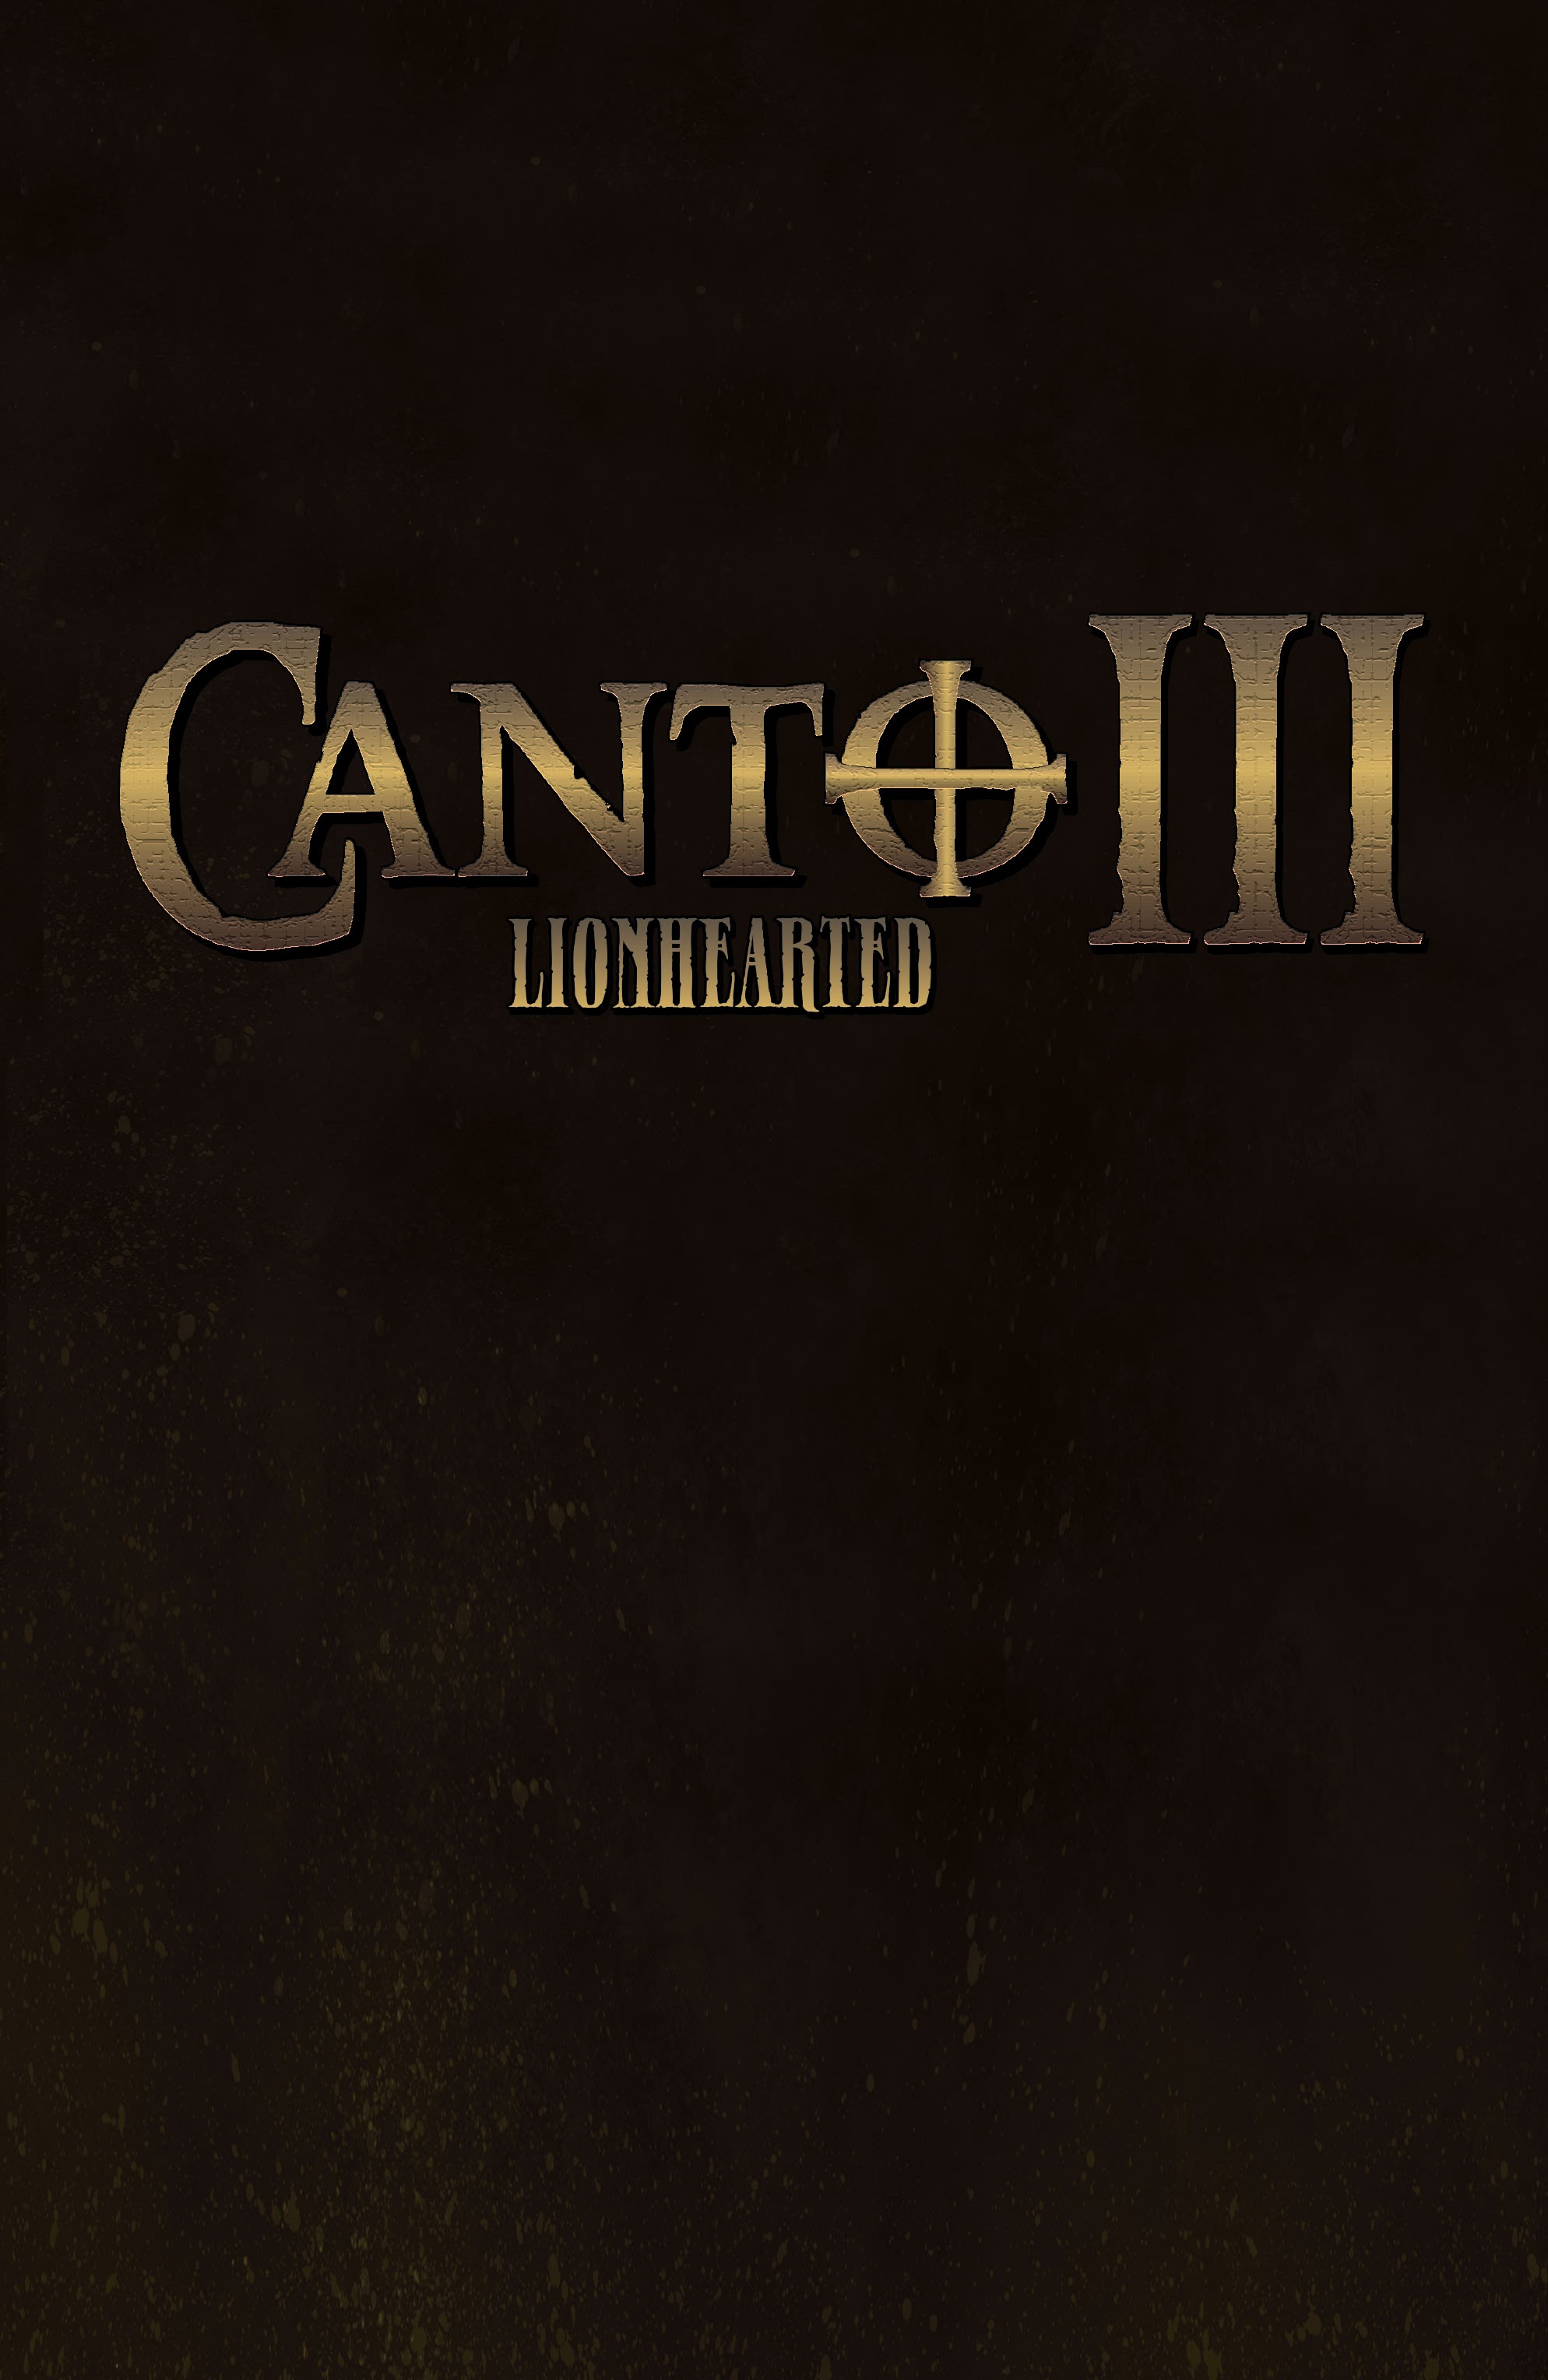 Read online Canto III: Lionhearted comic -  Issue #3 - 29